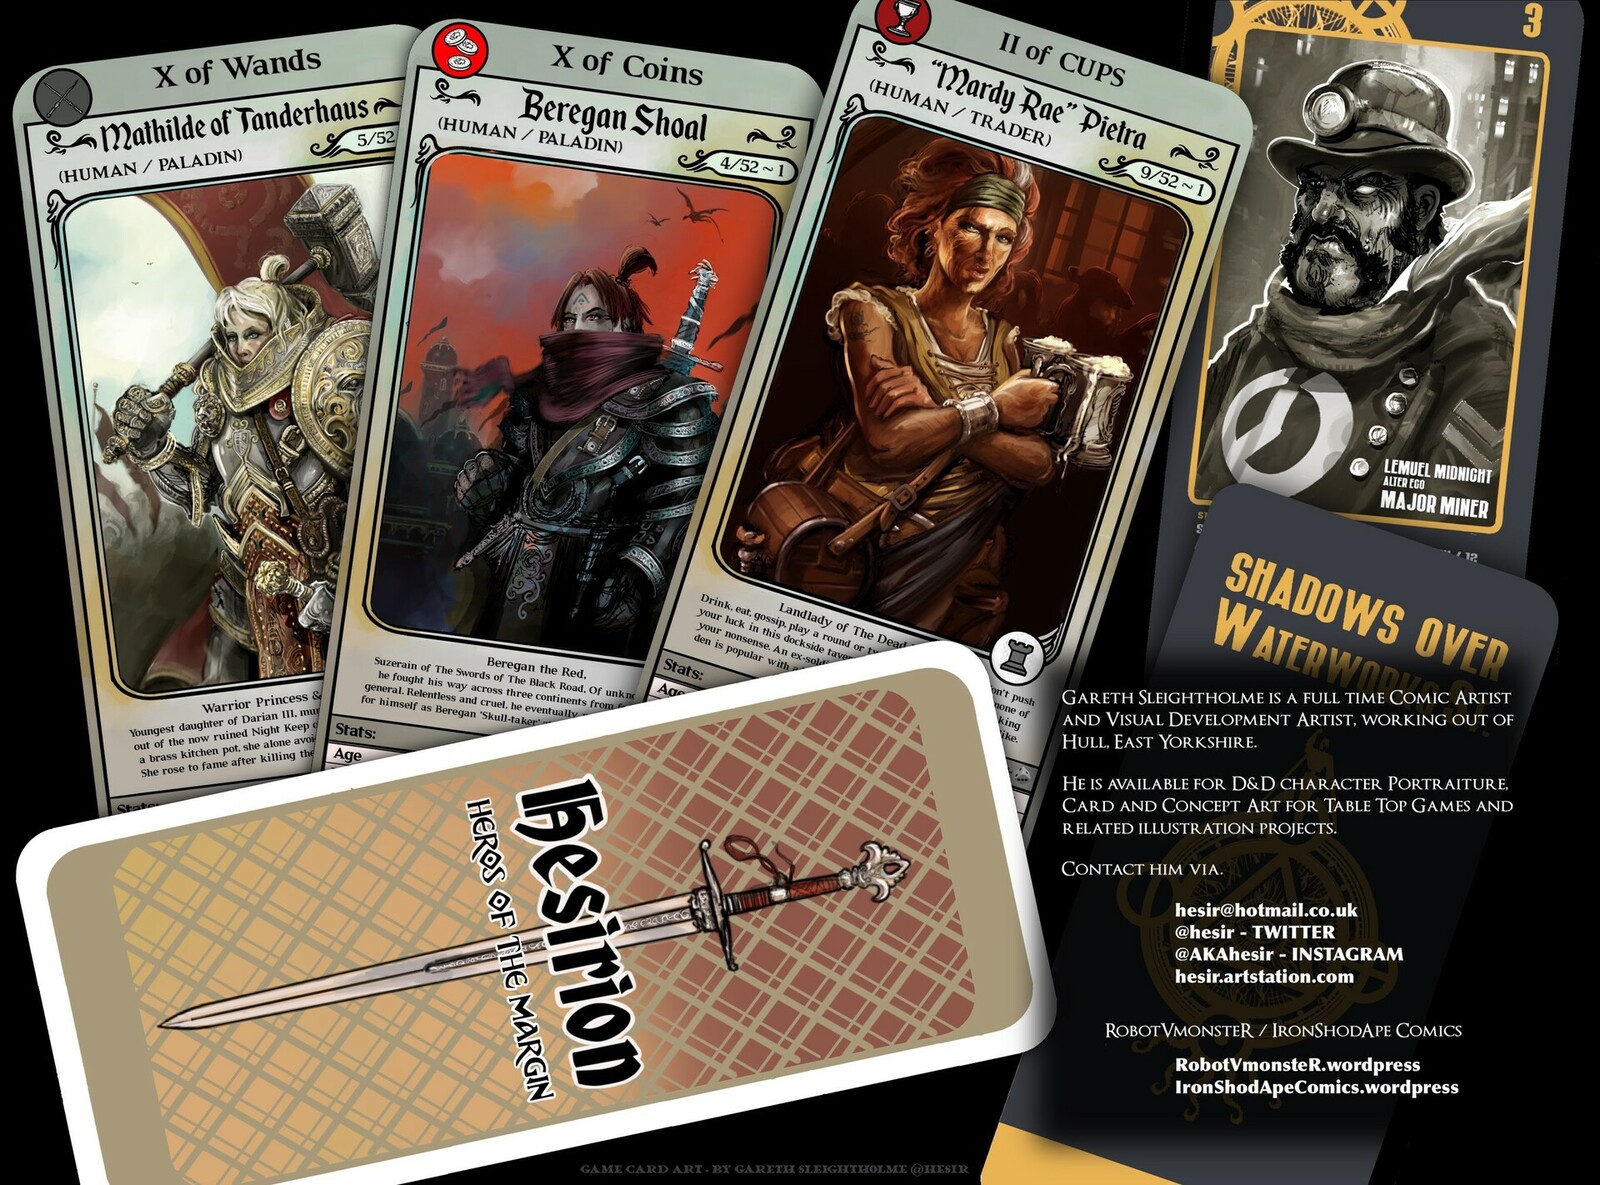 Test art as Game Cards.